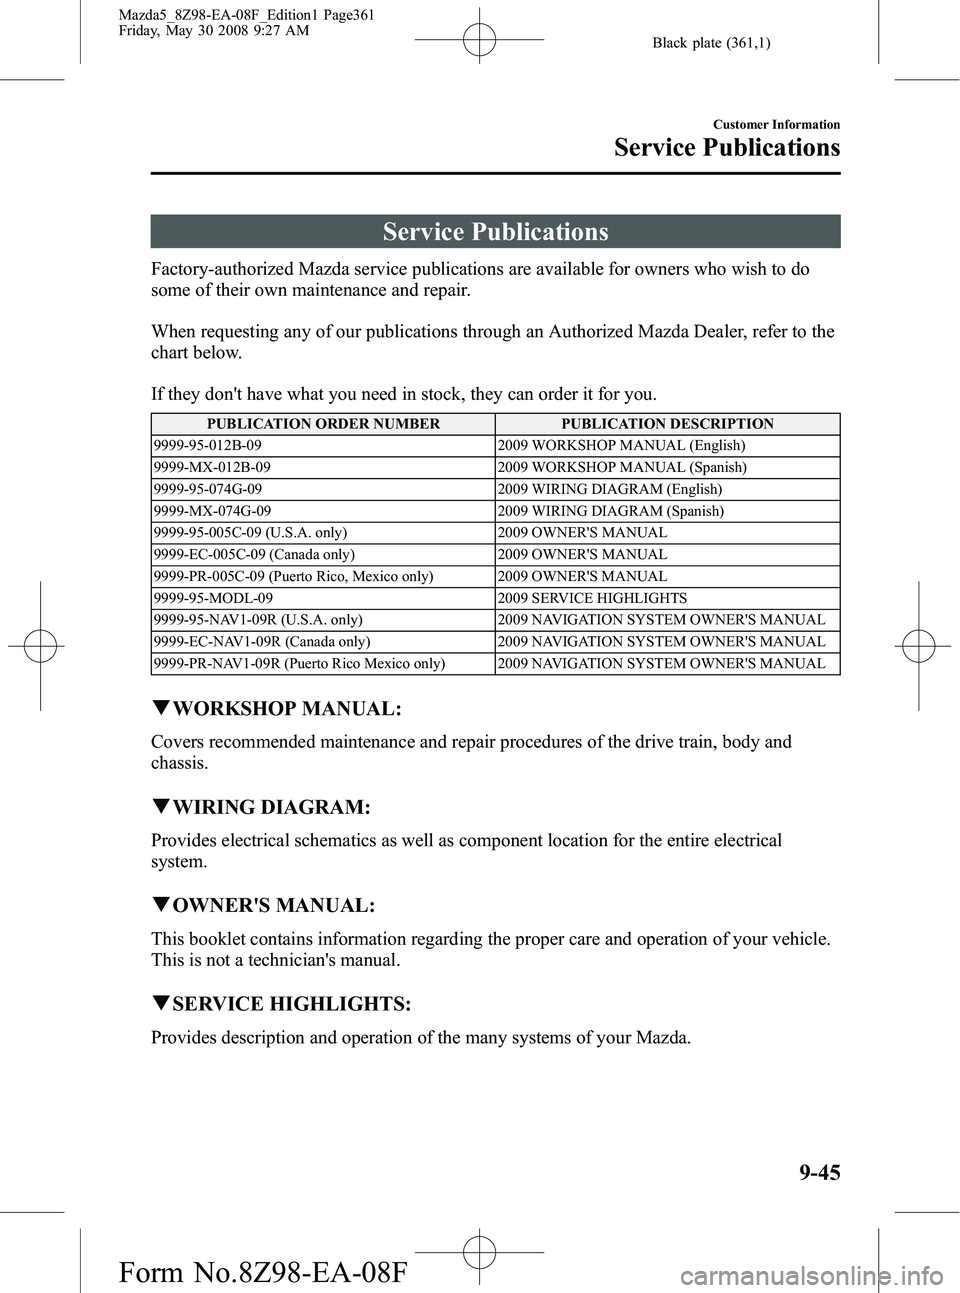 MAZDA MODEL 5 2009  Owners Manual Black plate (361,1)
Service Publications
Factory-authorized Mazda service publications are available for owners who wish to do
some of their own maintenance and repair.
When requesting any of our publ